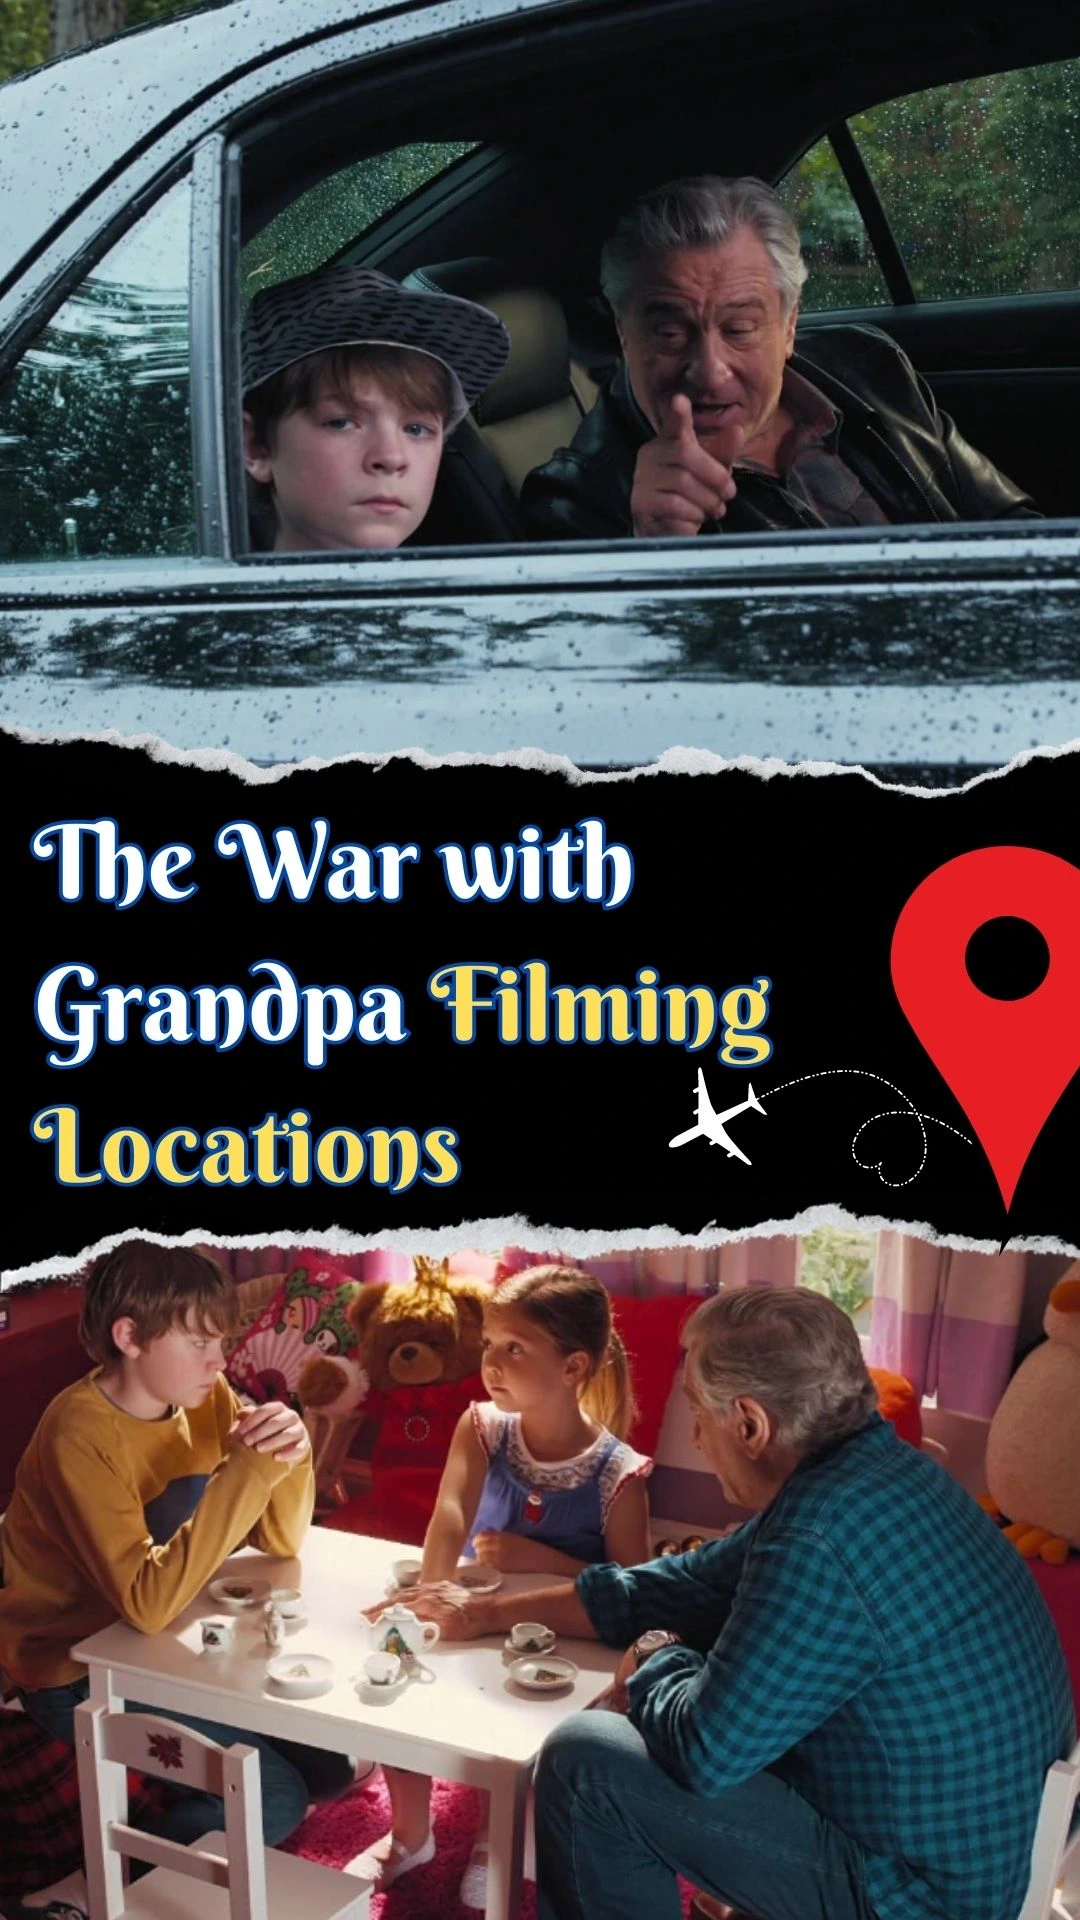 The War with Grandpa Filming Locations